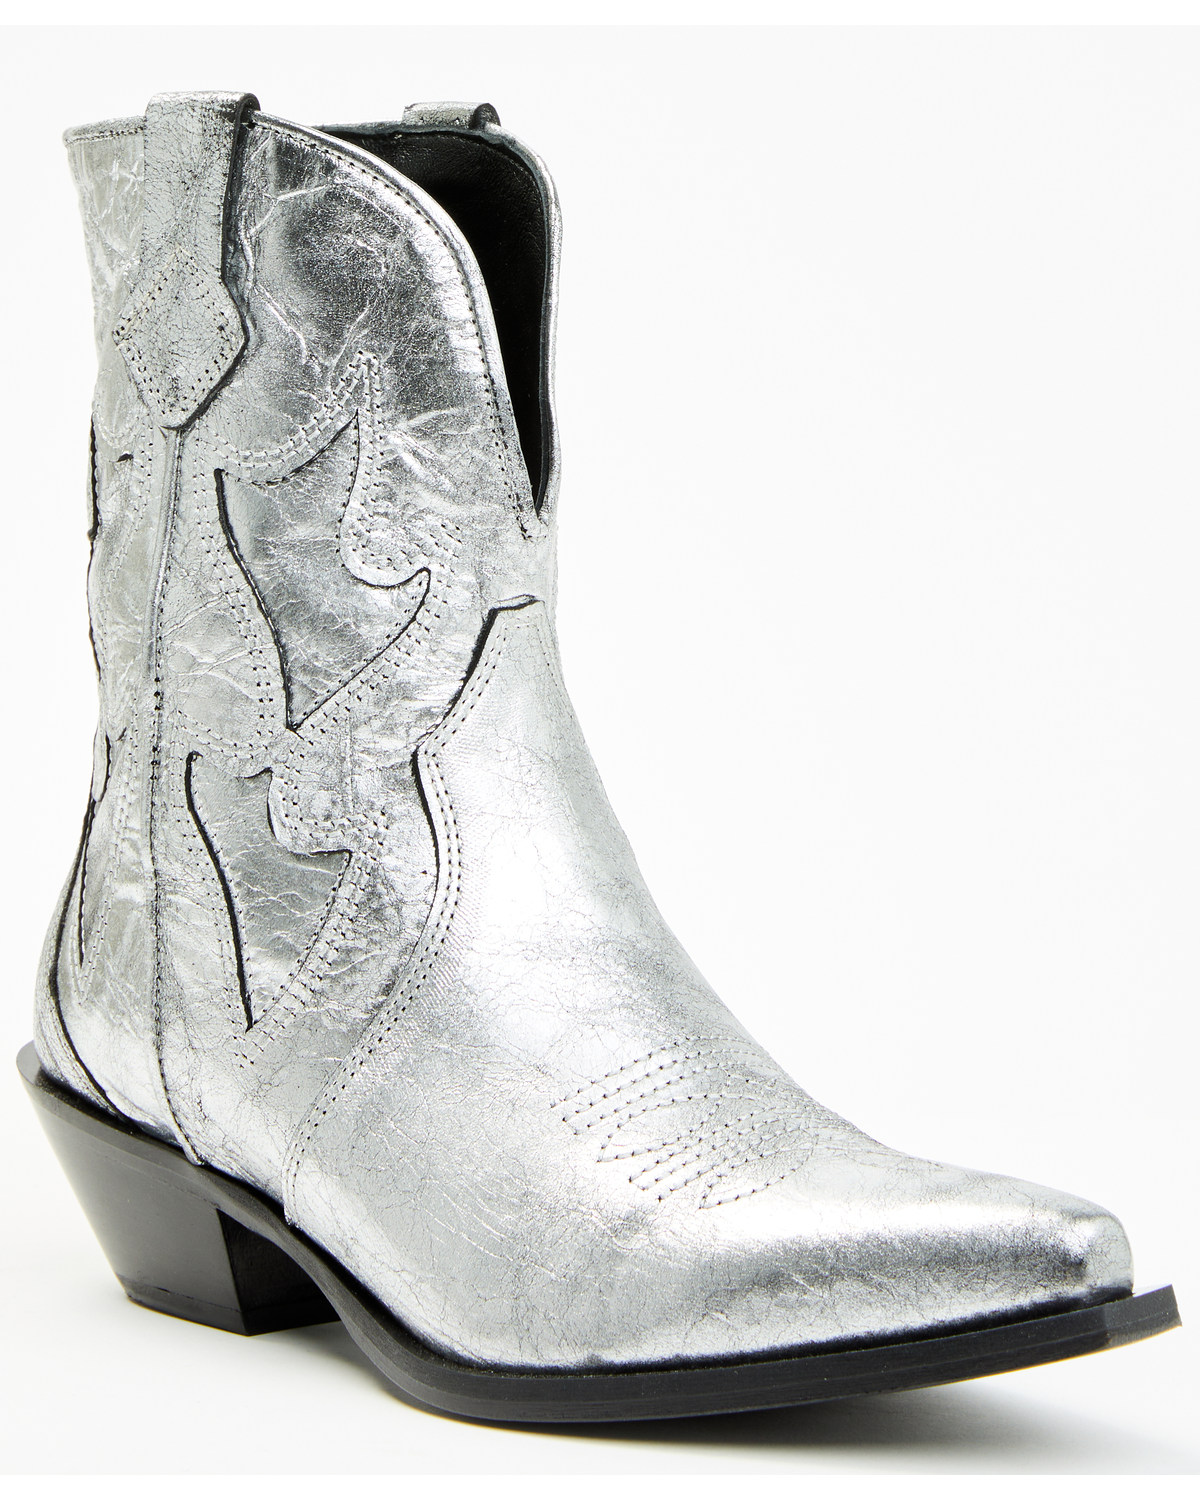 Free People Women's Way Out West Metallic Western Boots - Snip Toe